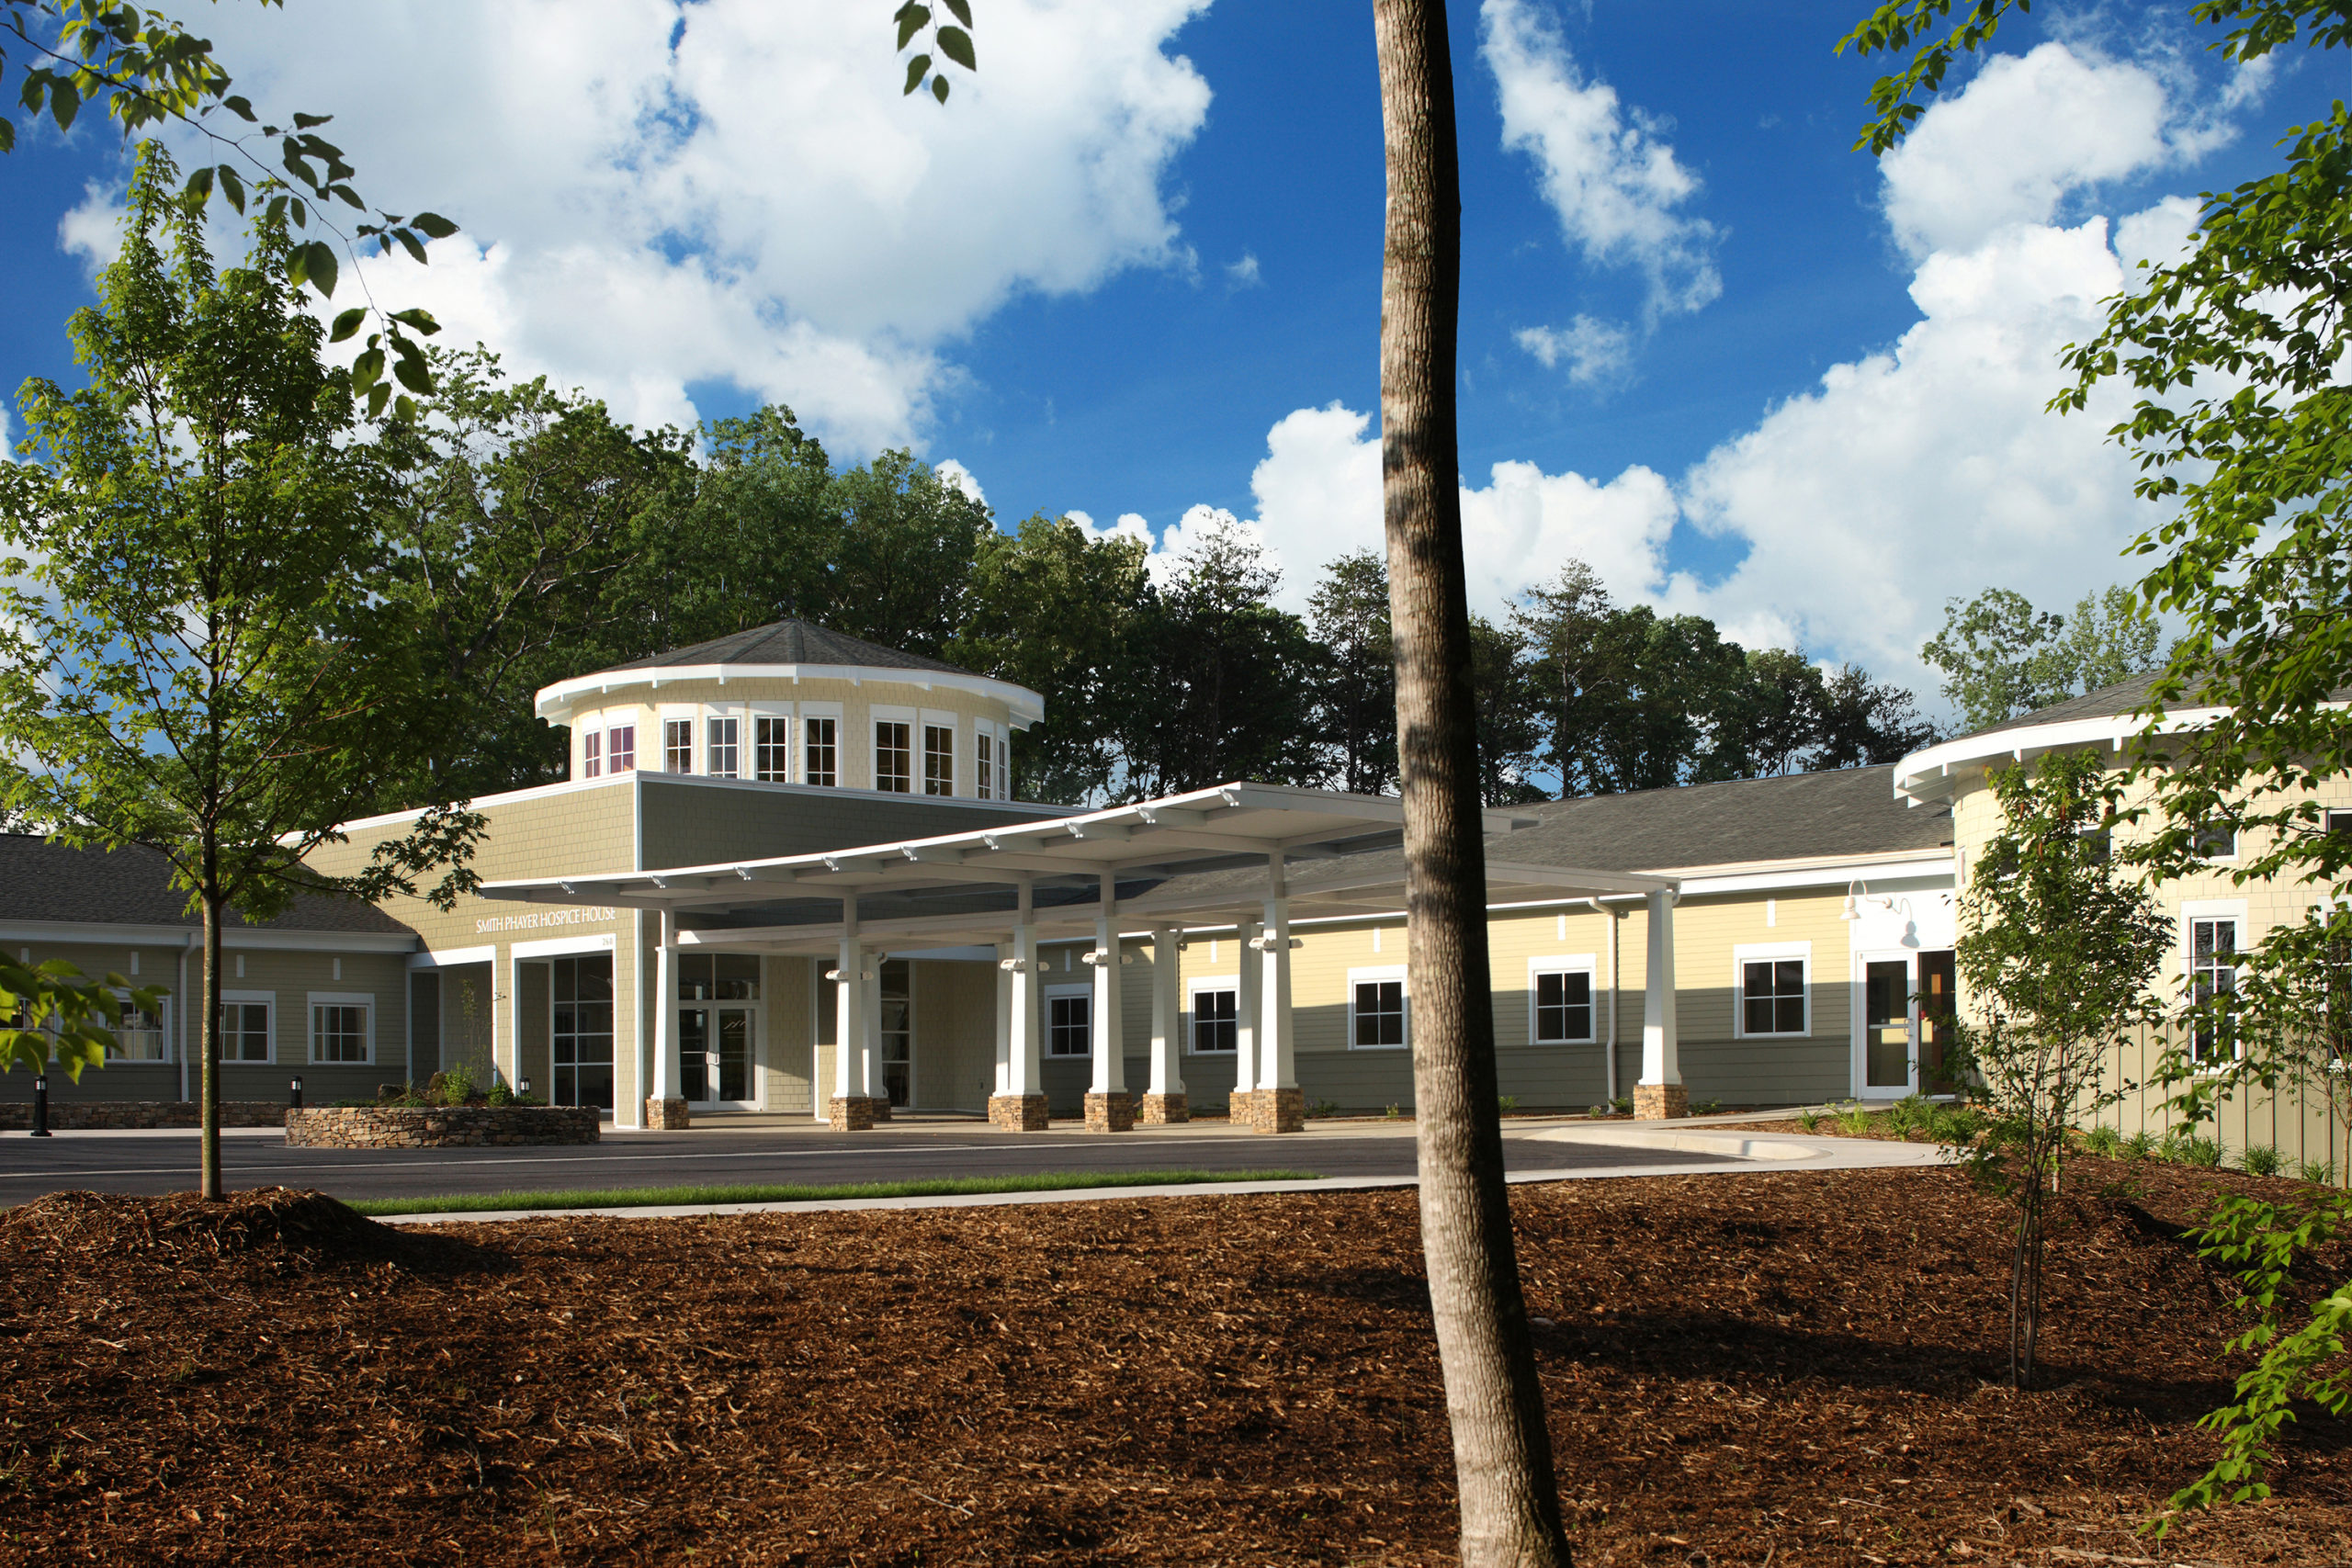 Image of the Smith Phayer Hospice House project.